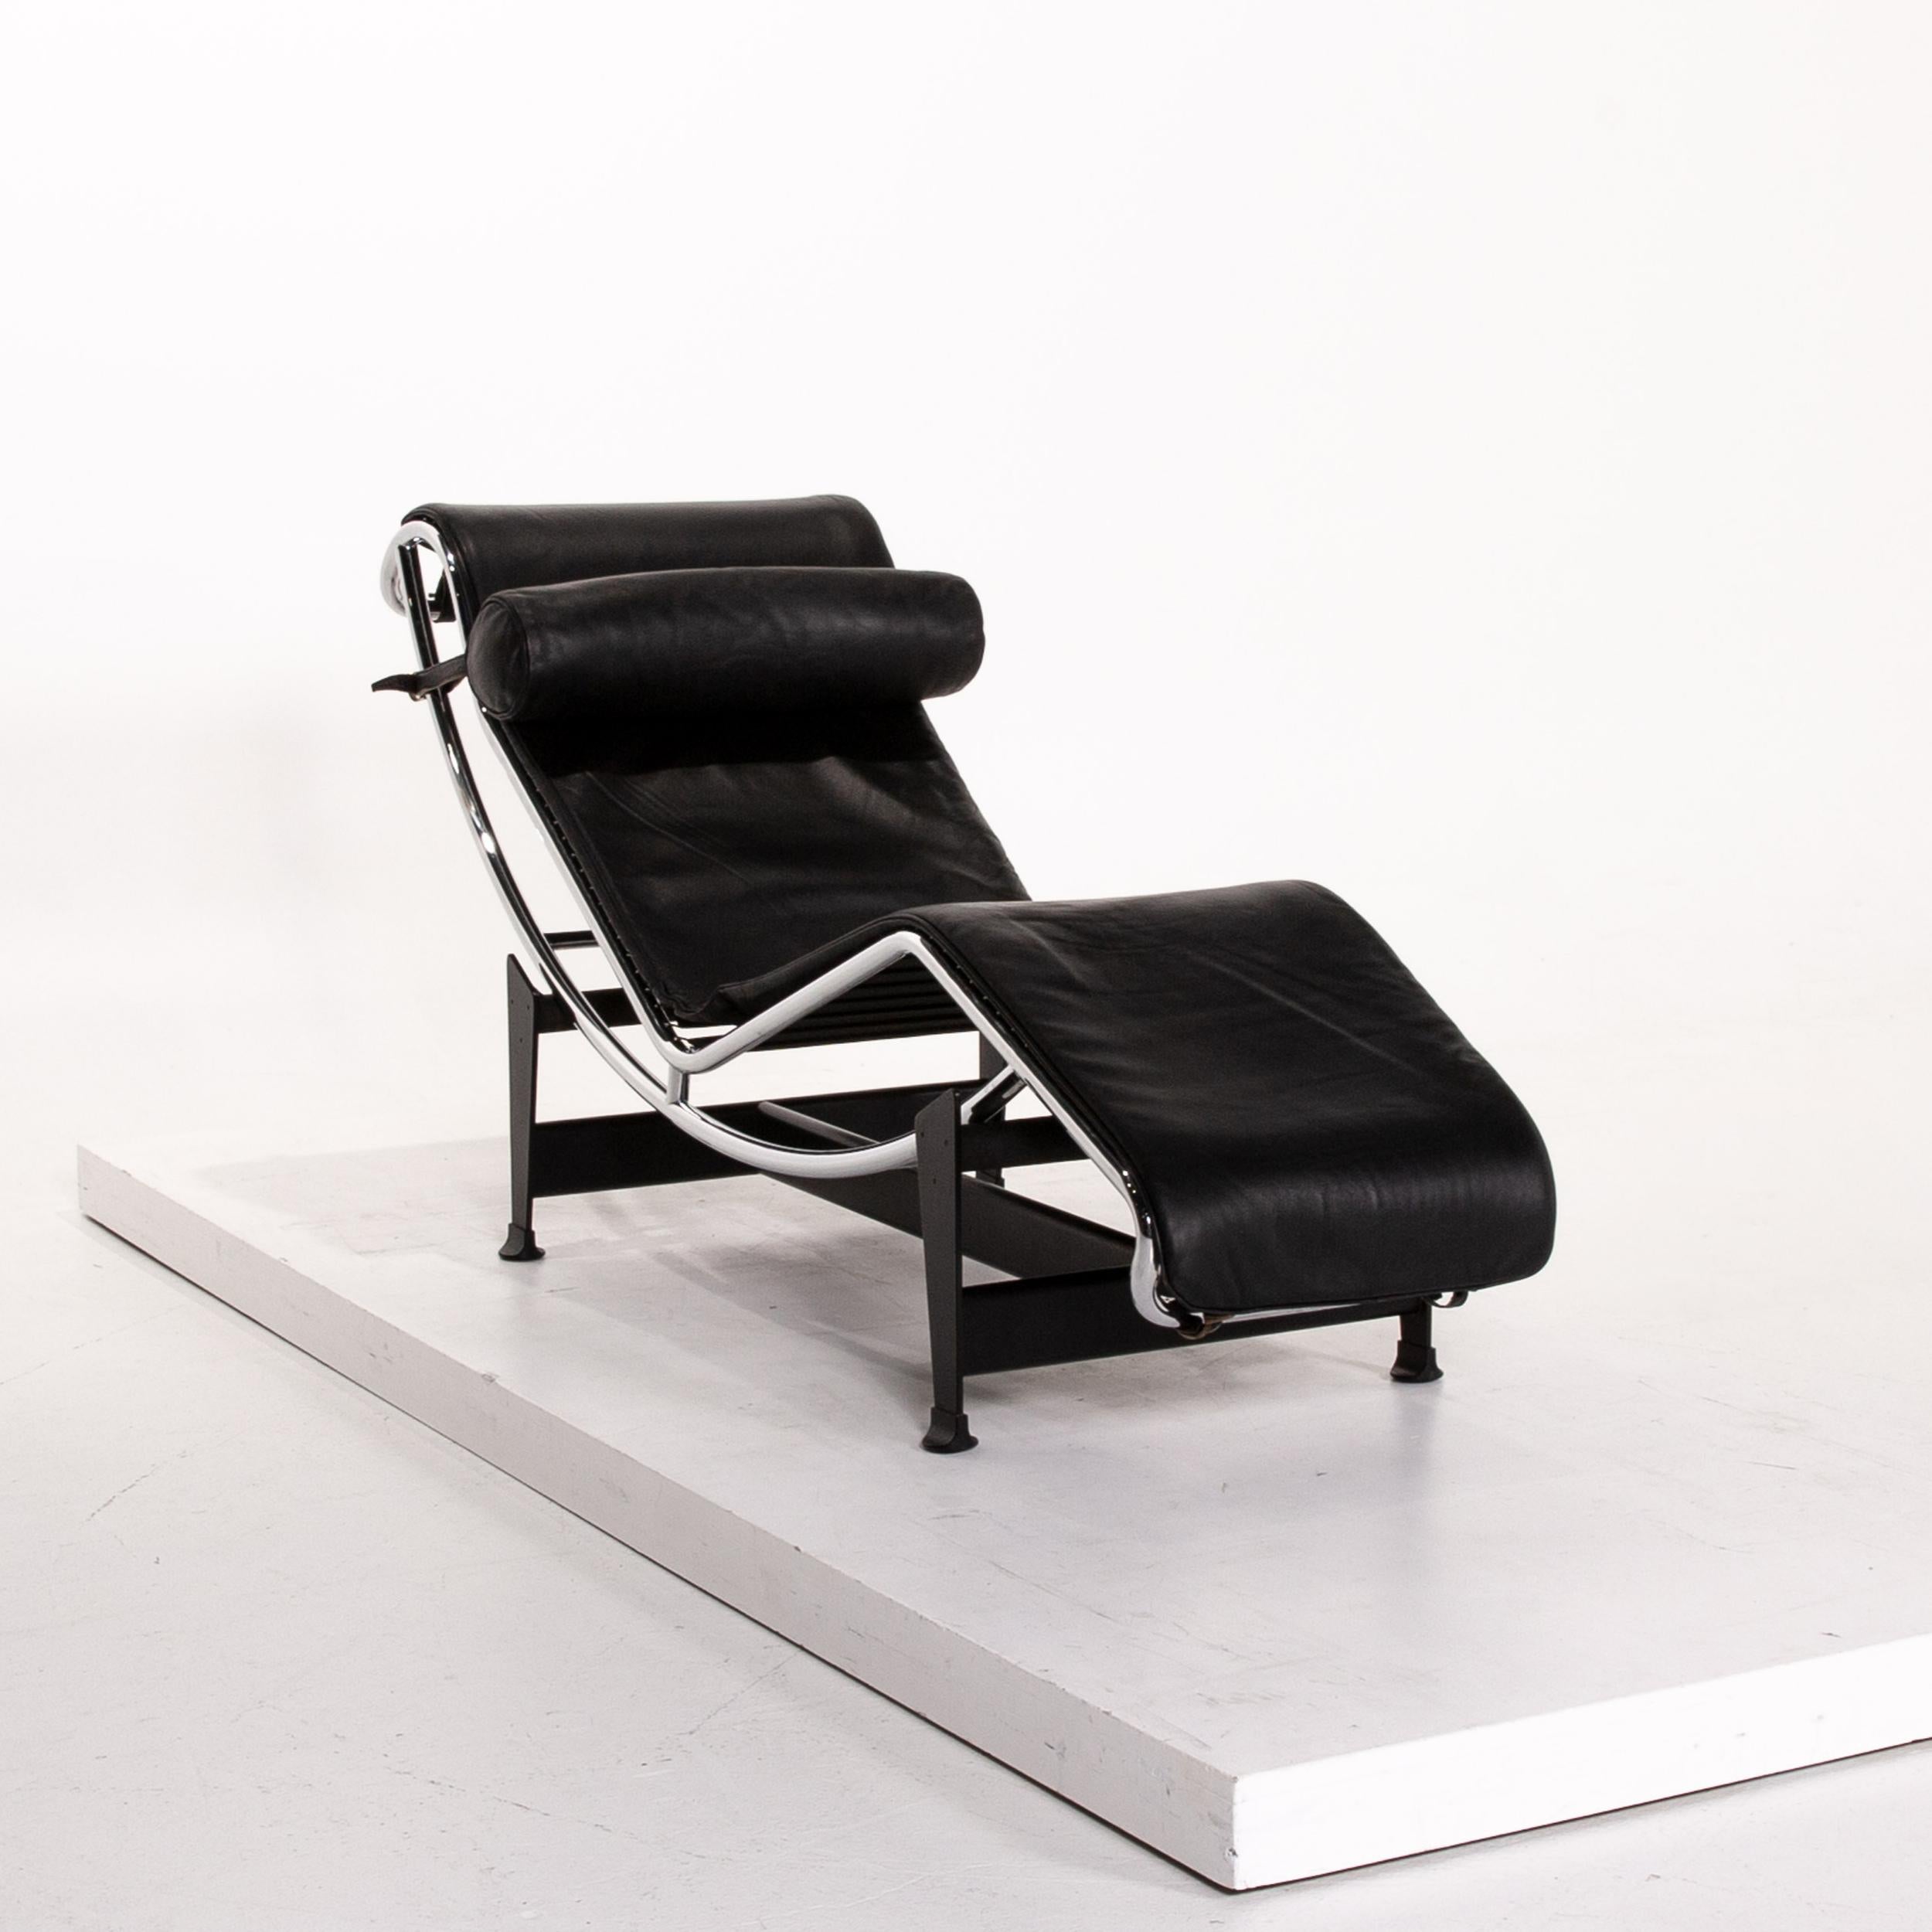 Cassina Le Corbusier LC 4 Leather Lounger Black Relax Lounger Relax Function For Sale 3